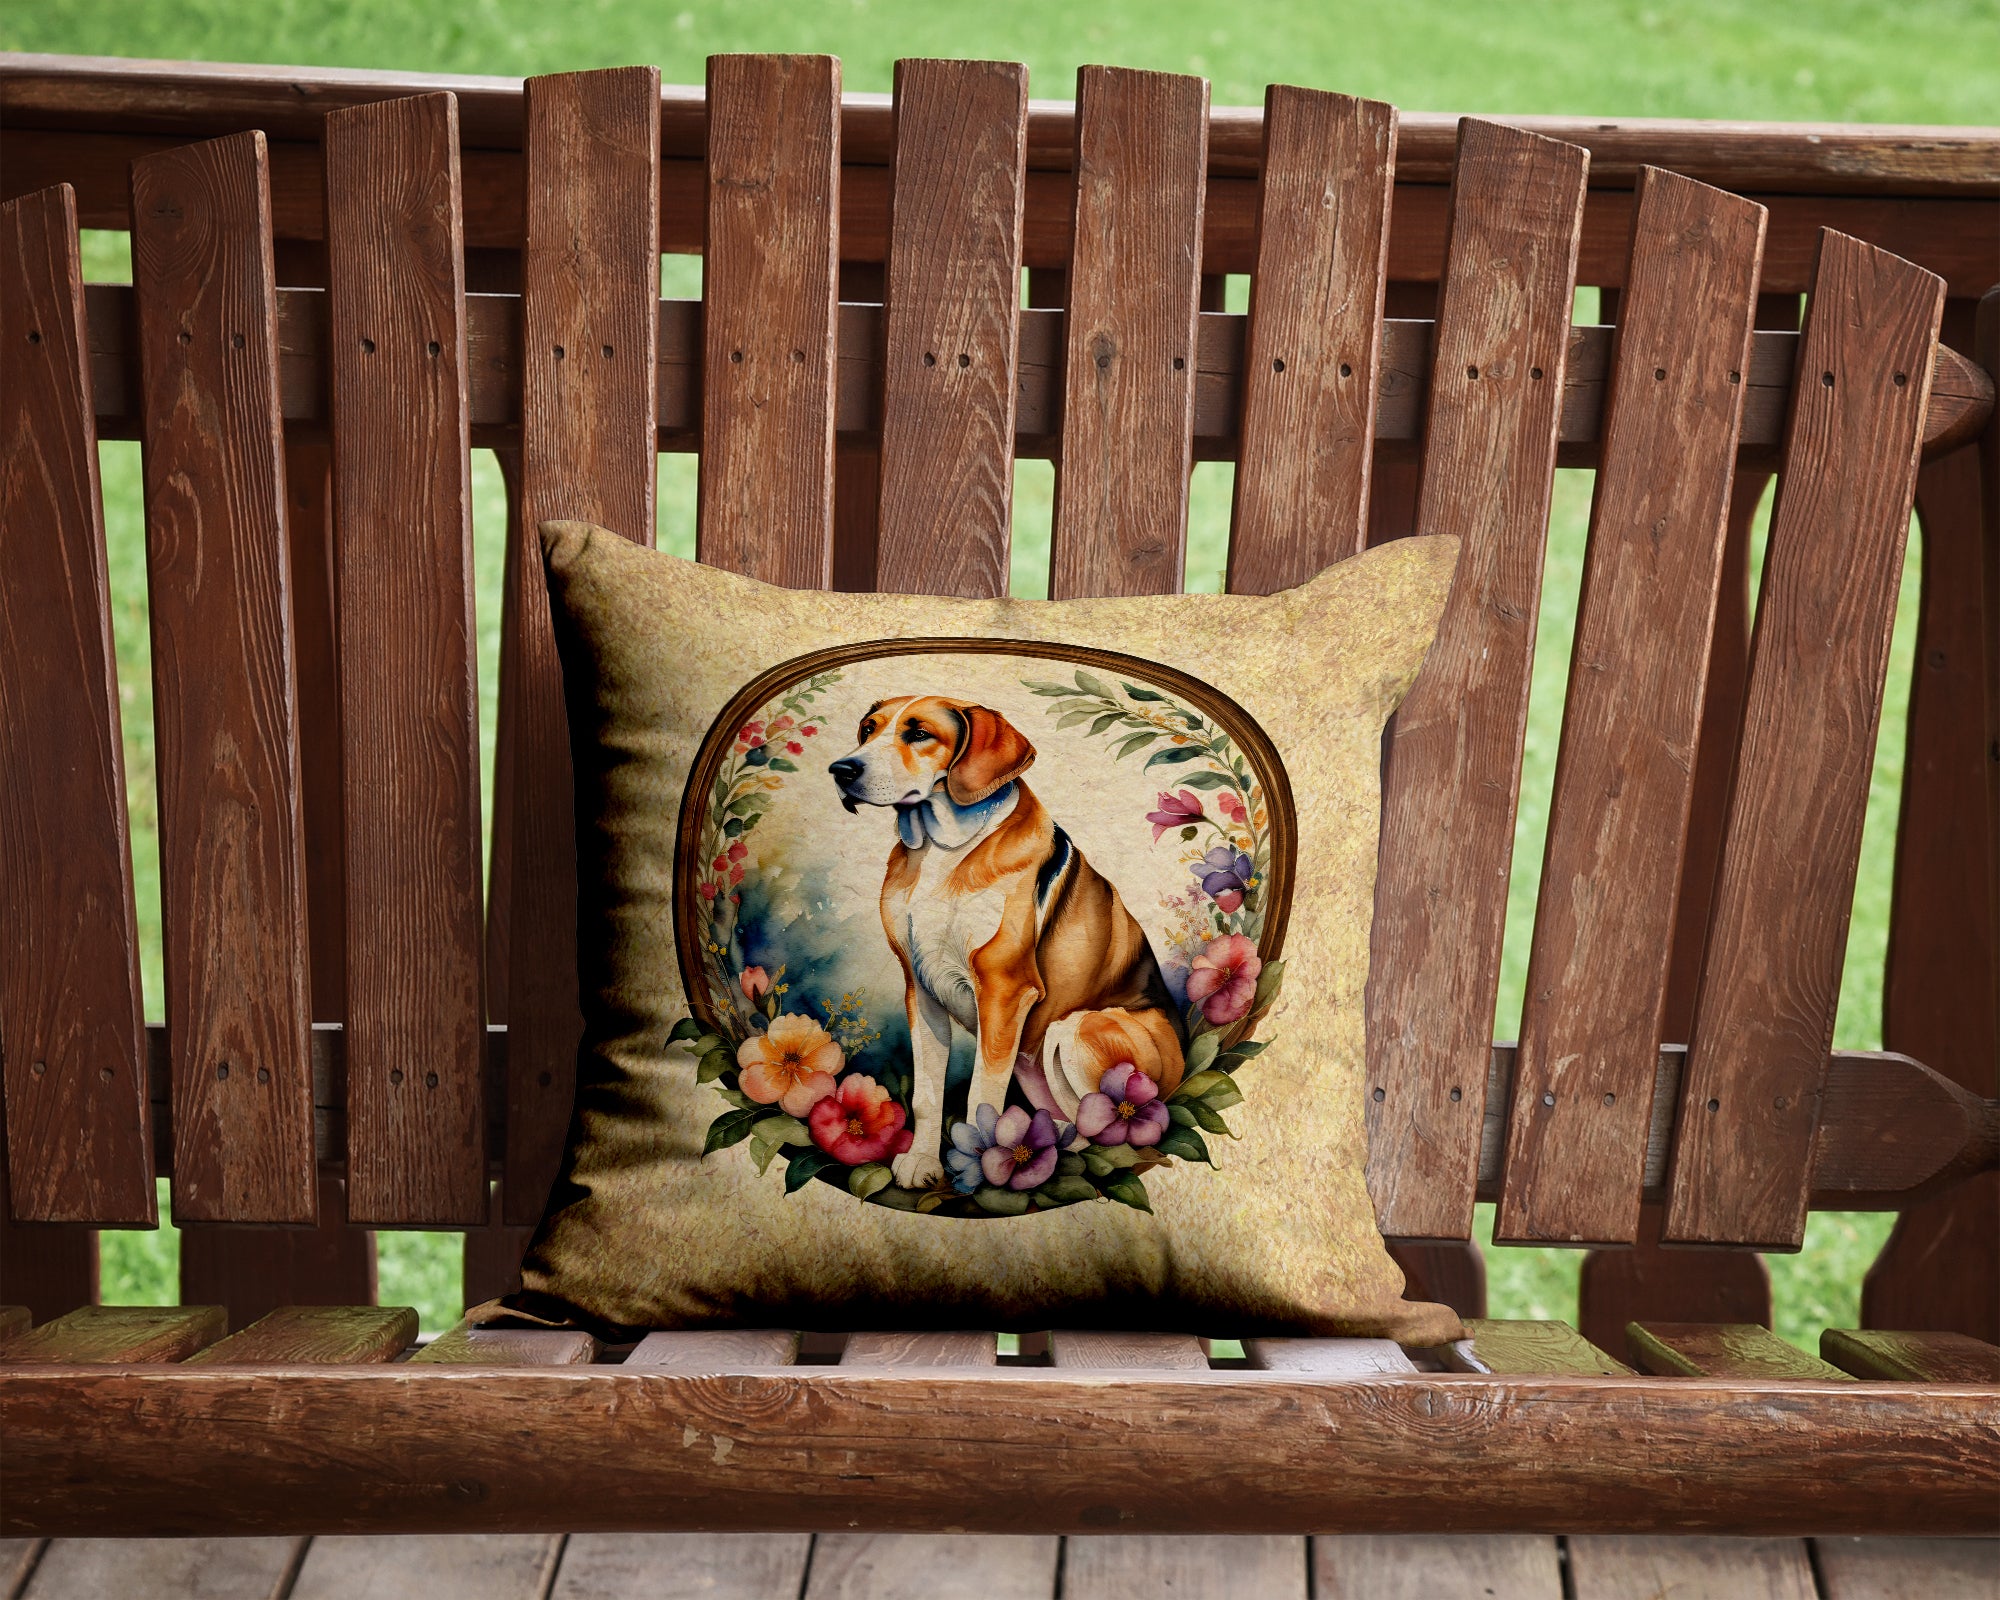 Buy this American Foxhound and Flowers Fabric Decorative Pillow